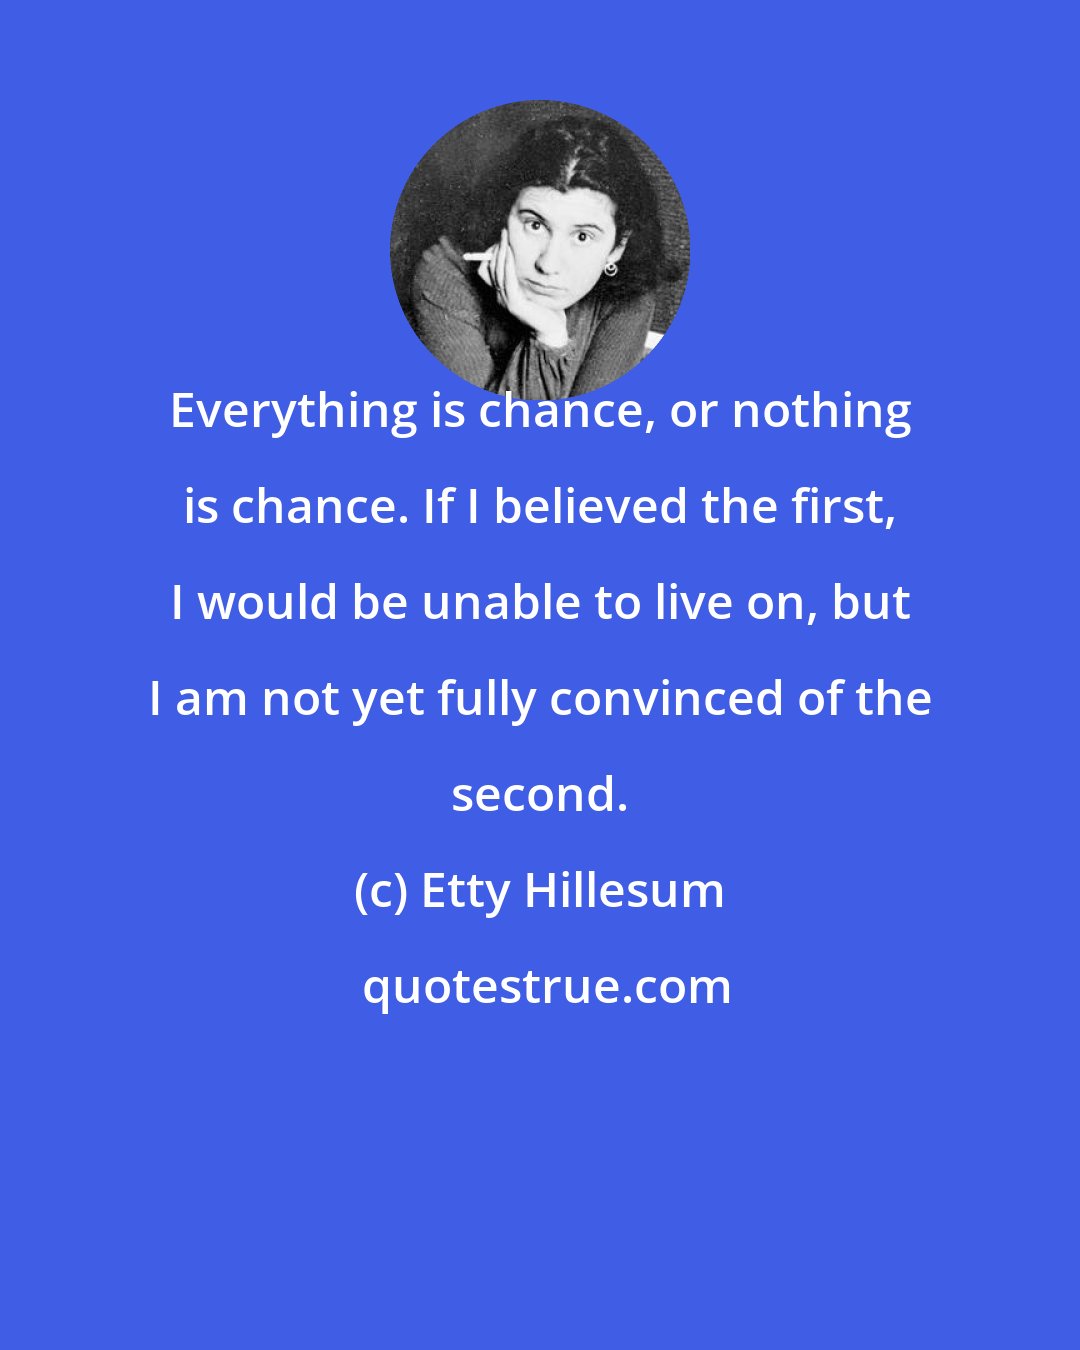 Etty Hillesum: Everything is chance, or nothing is chance. If I believed the first, I would be unable to live on, but I am not yet fully convinced of the second.